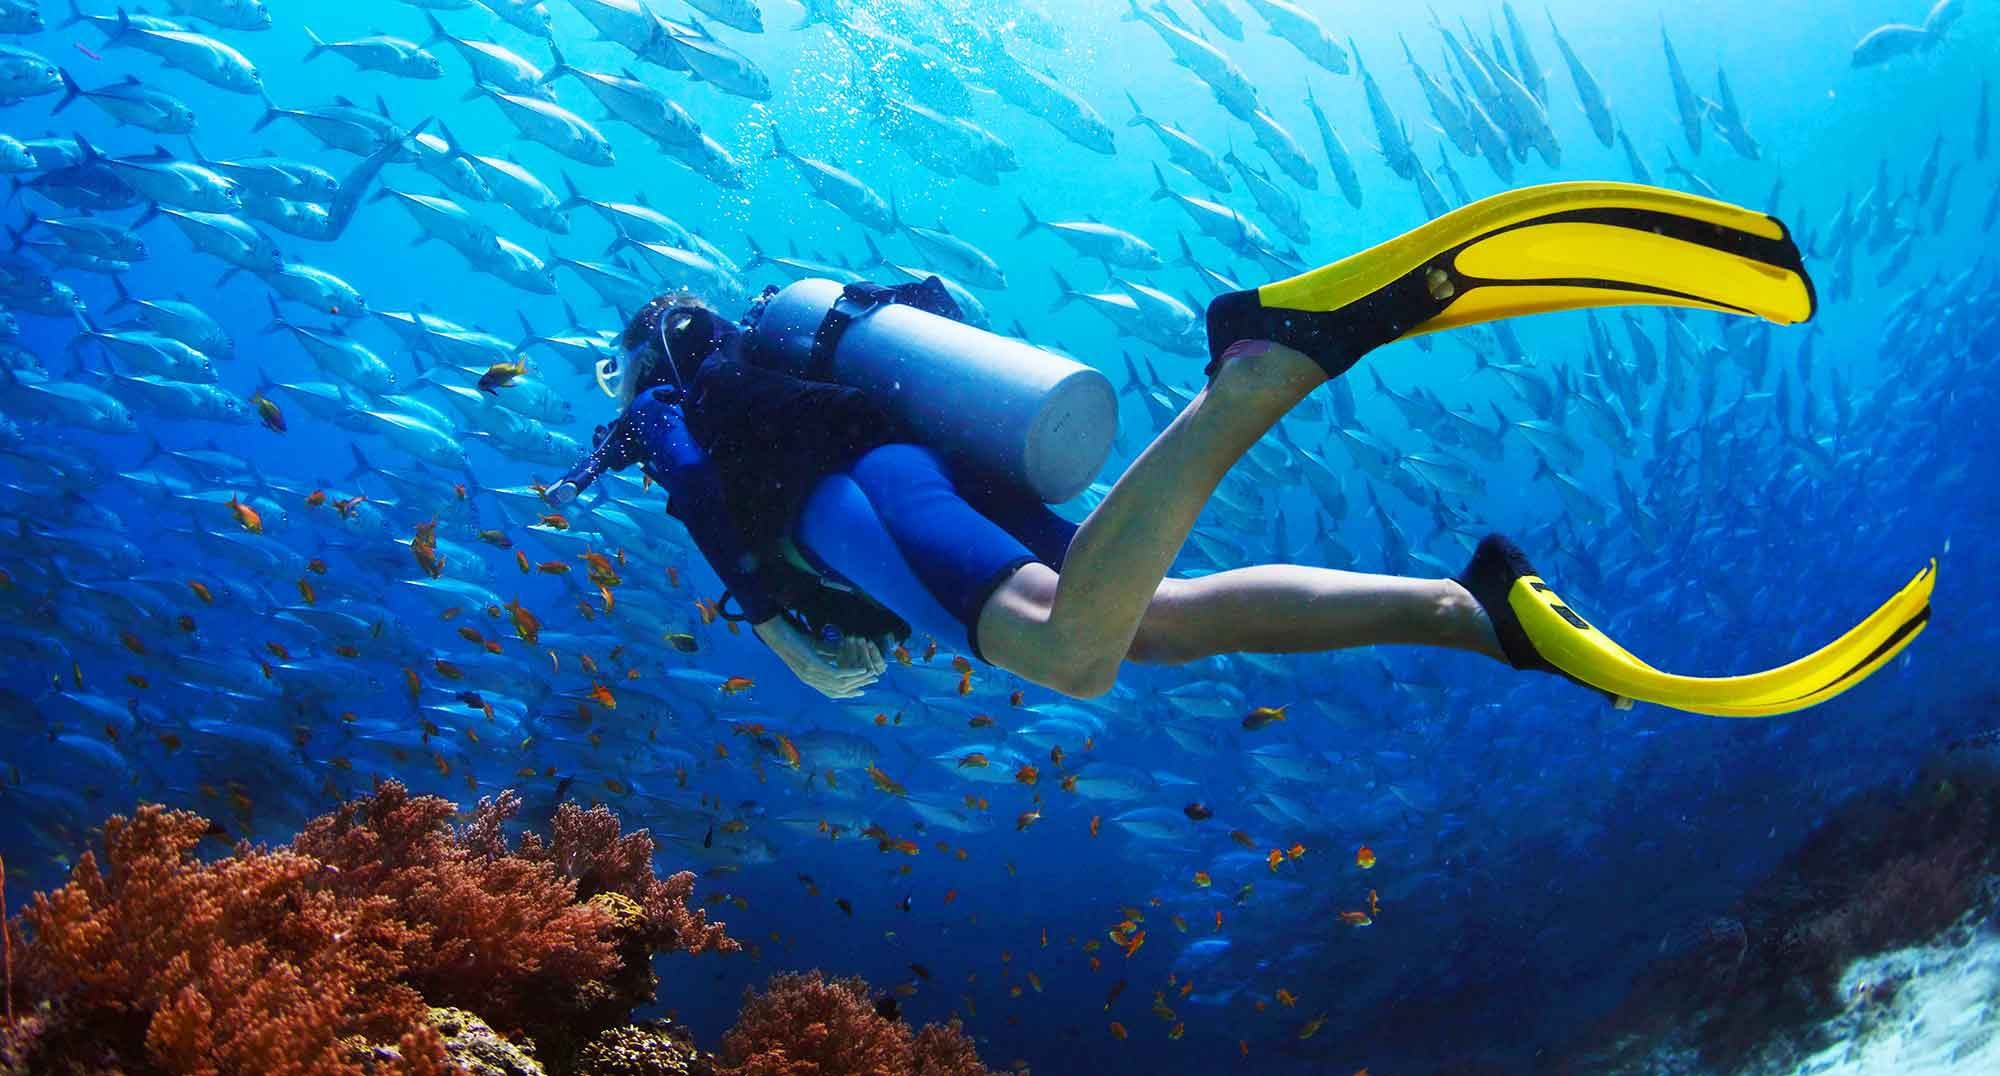 Best spots for scuba diving in Thailand